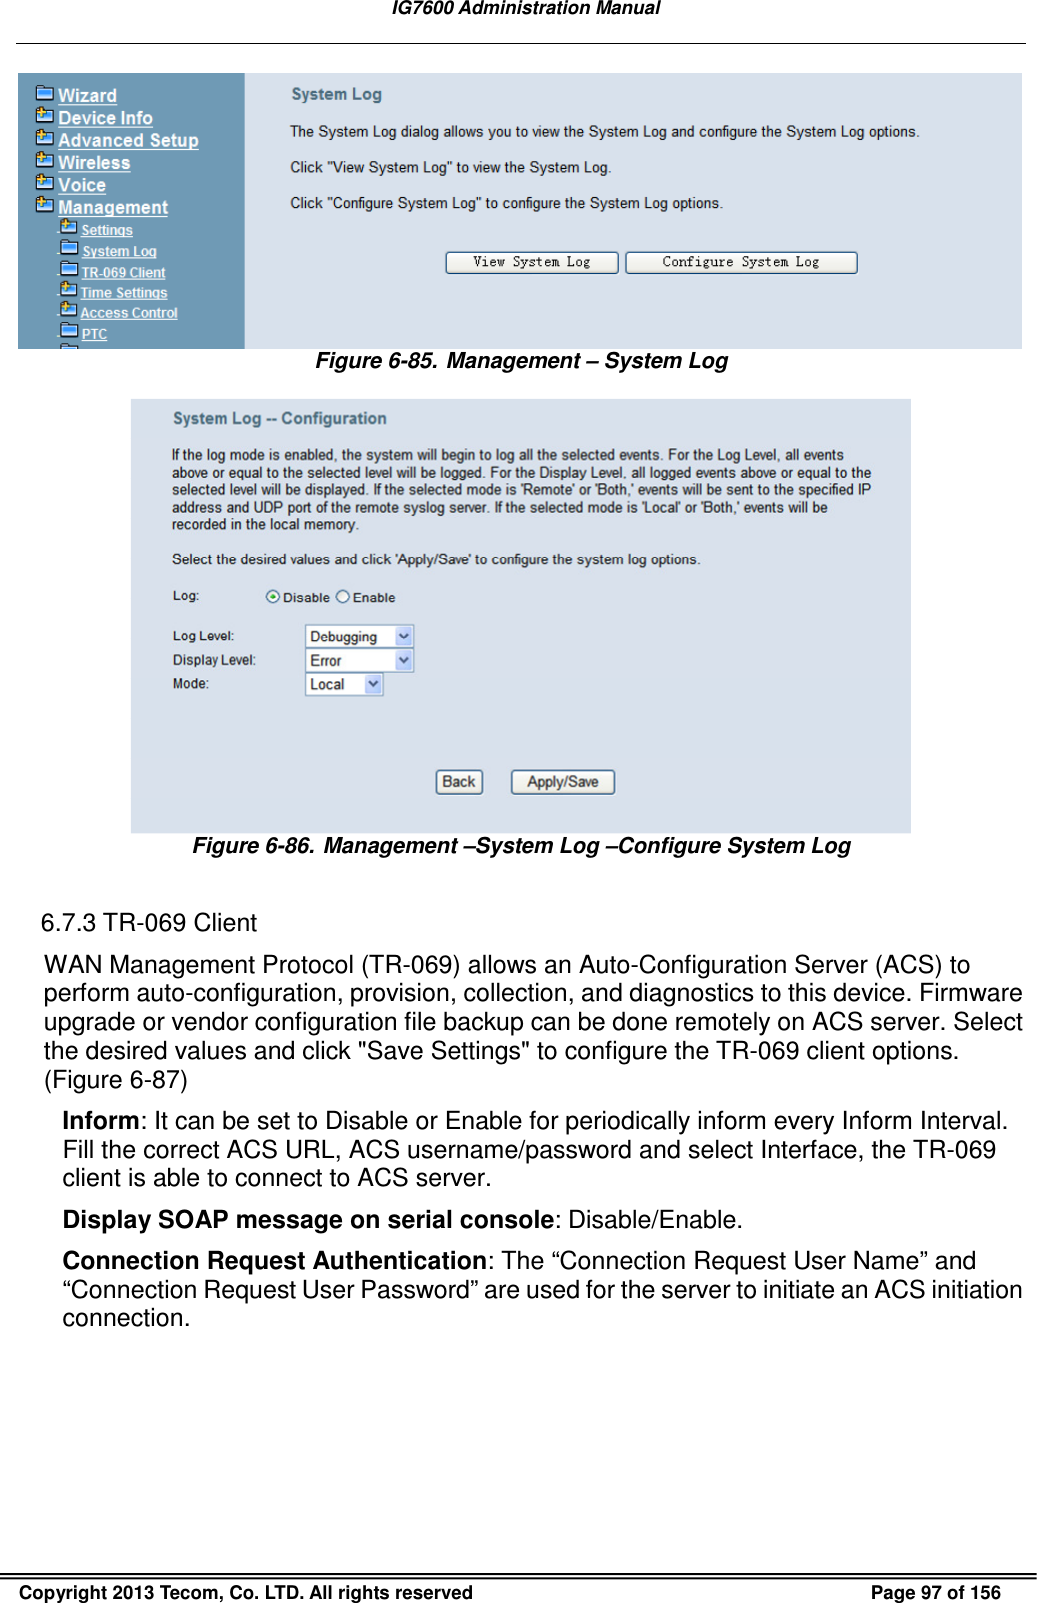   IG7600 Administration Manual  Copyright 2013 Tecom, Co. LTD. All rights reserved  Page 97 of 156  Figure 6-85. Management – System Log   Figure 6-86. Management –System Log –Configure System Log  6.7.3 TR-069 Client WAN Management Protocol (TR-069) allows an Auto-Configuration Server (ACS) to perform auto-configuration, provision, collection, and diagnostics to this device. Firmware upgrade or vendor configuration file backup can be done remotely on ACS server. Select the desired values and click &quot;Save Settings&quot; to configure the TR-069 client options. (Figure 6-87) Inform: It can be set to Disable or Enable for periodically inform every Inform Interval. Fill the correct ACS URL, ACS username/password and select Interface, the TR-069 client is able to connect to ACS server. Display SOAP message on serial console: Disable/Enable. Connection Request Authentication: The “Connection Request User Name” and “Connection Request User Password” are used for the server to initiate an ACS initiation connection. 